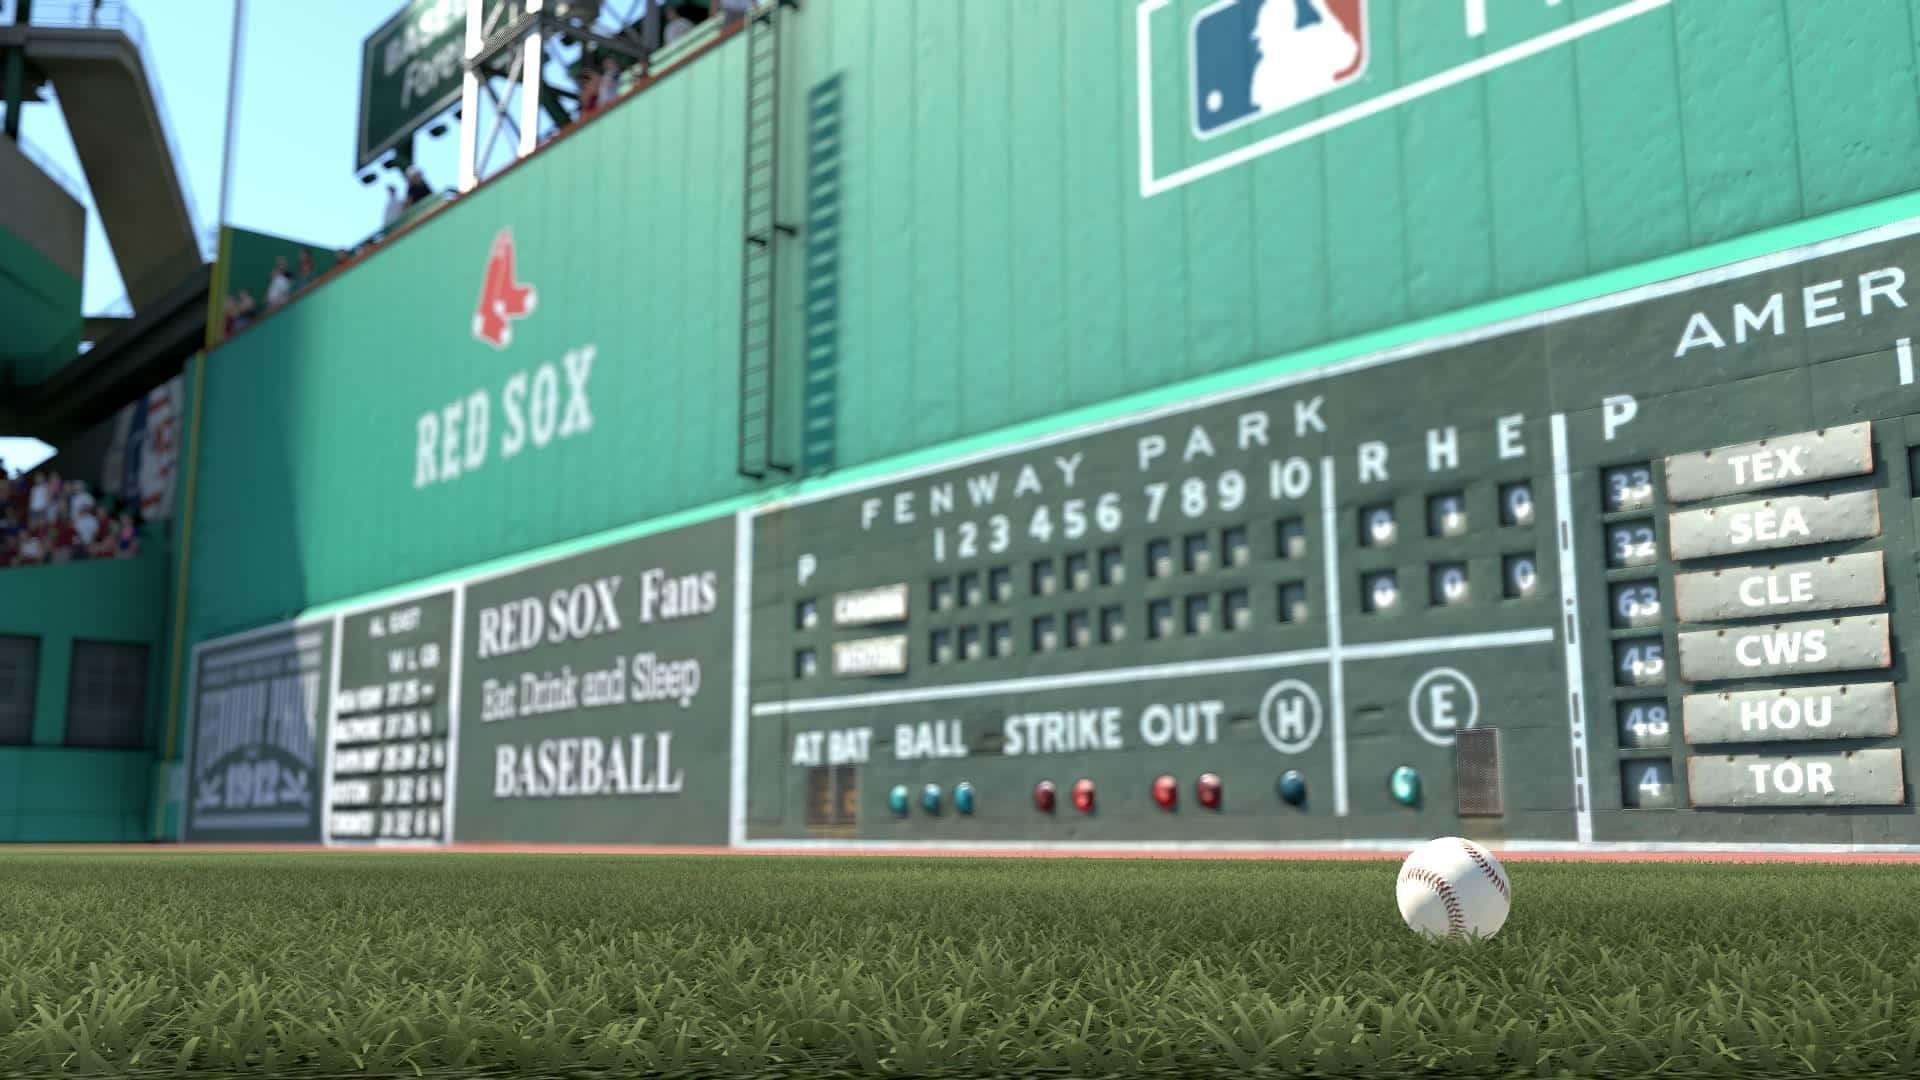 Boston Red Sox's Iconic Fenway Park at its Finest Wallpaper